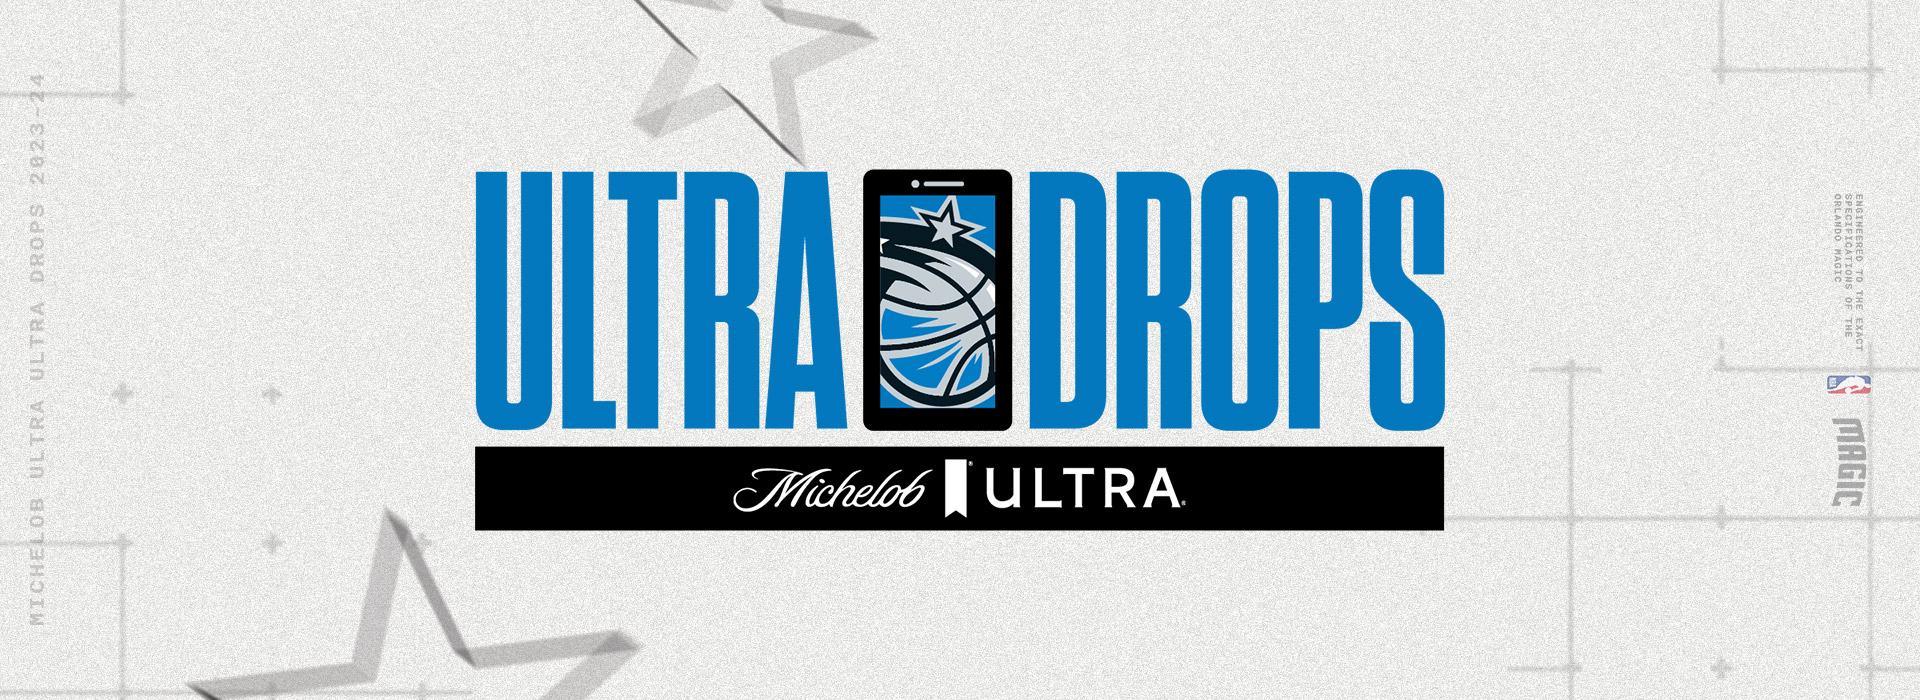 Ultra Drops Presented By Michelob Ultra